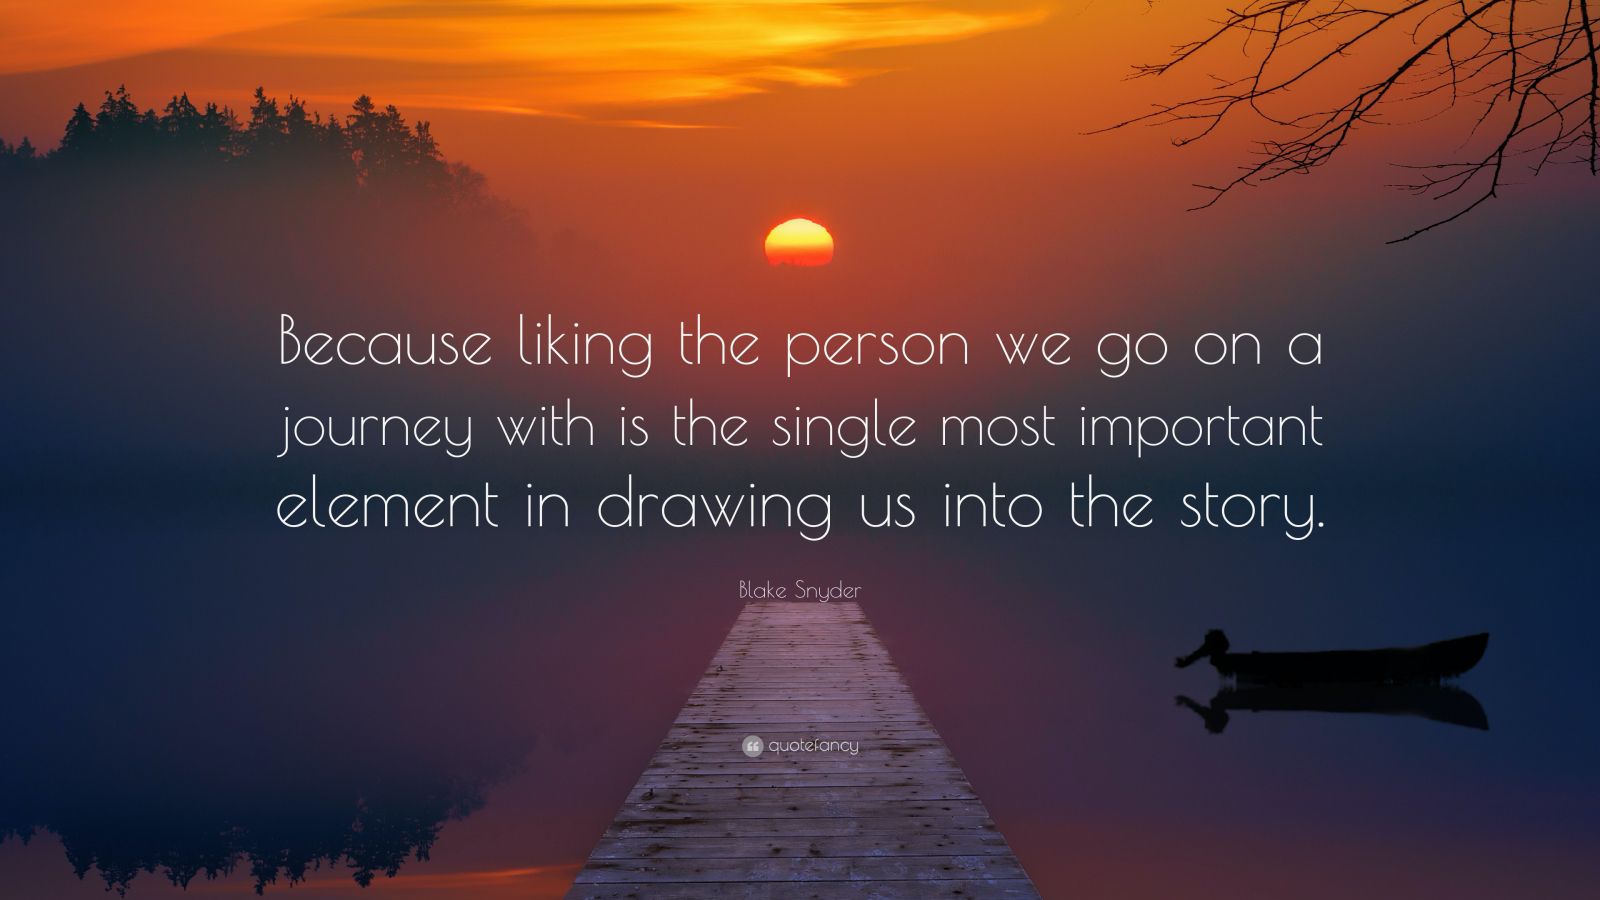 Blake Snyder Quote: “Because liking the person we go on a journey with ...